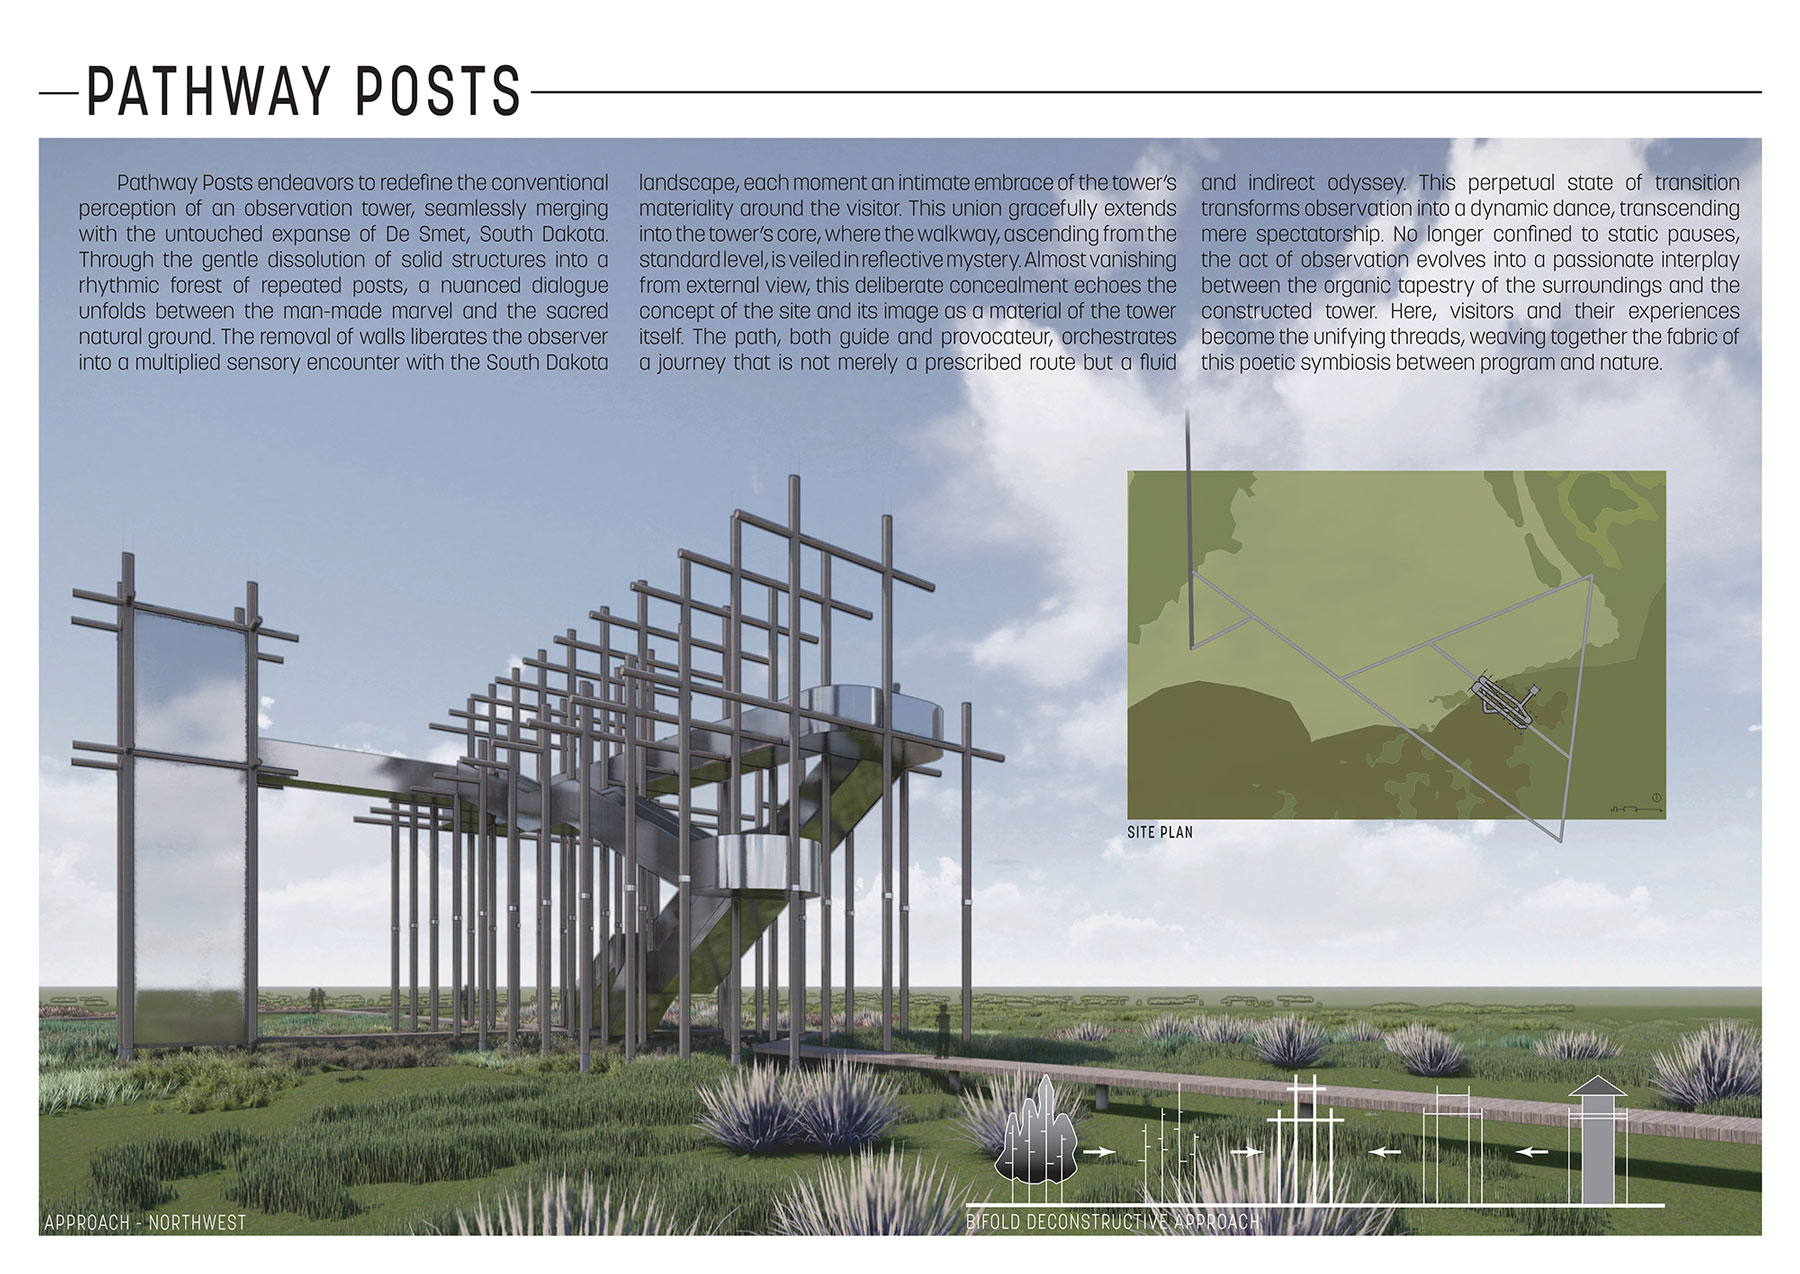 The top left corner of the photo reads &quot;pathway posts&quot;. The rest of the photo shows their design, which is a metallic pathway that winds upward on stilts to the top of a tower.